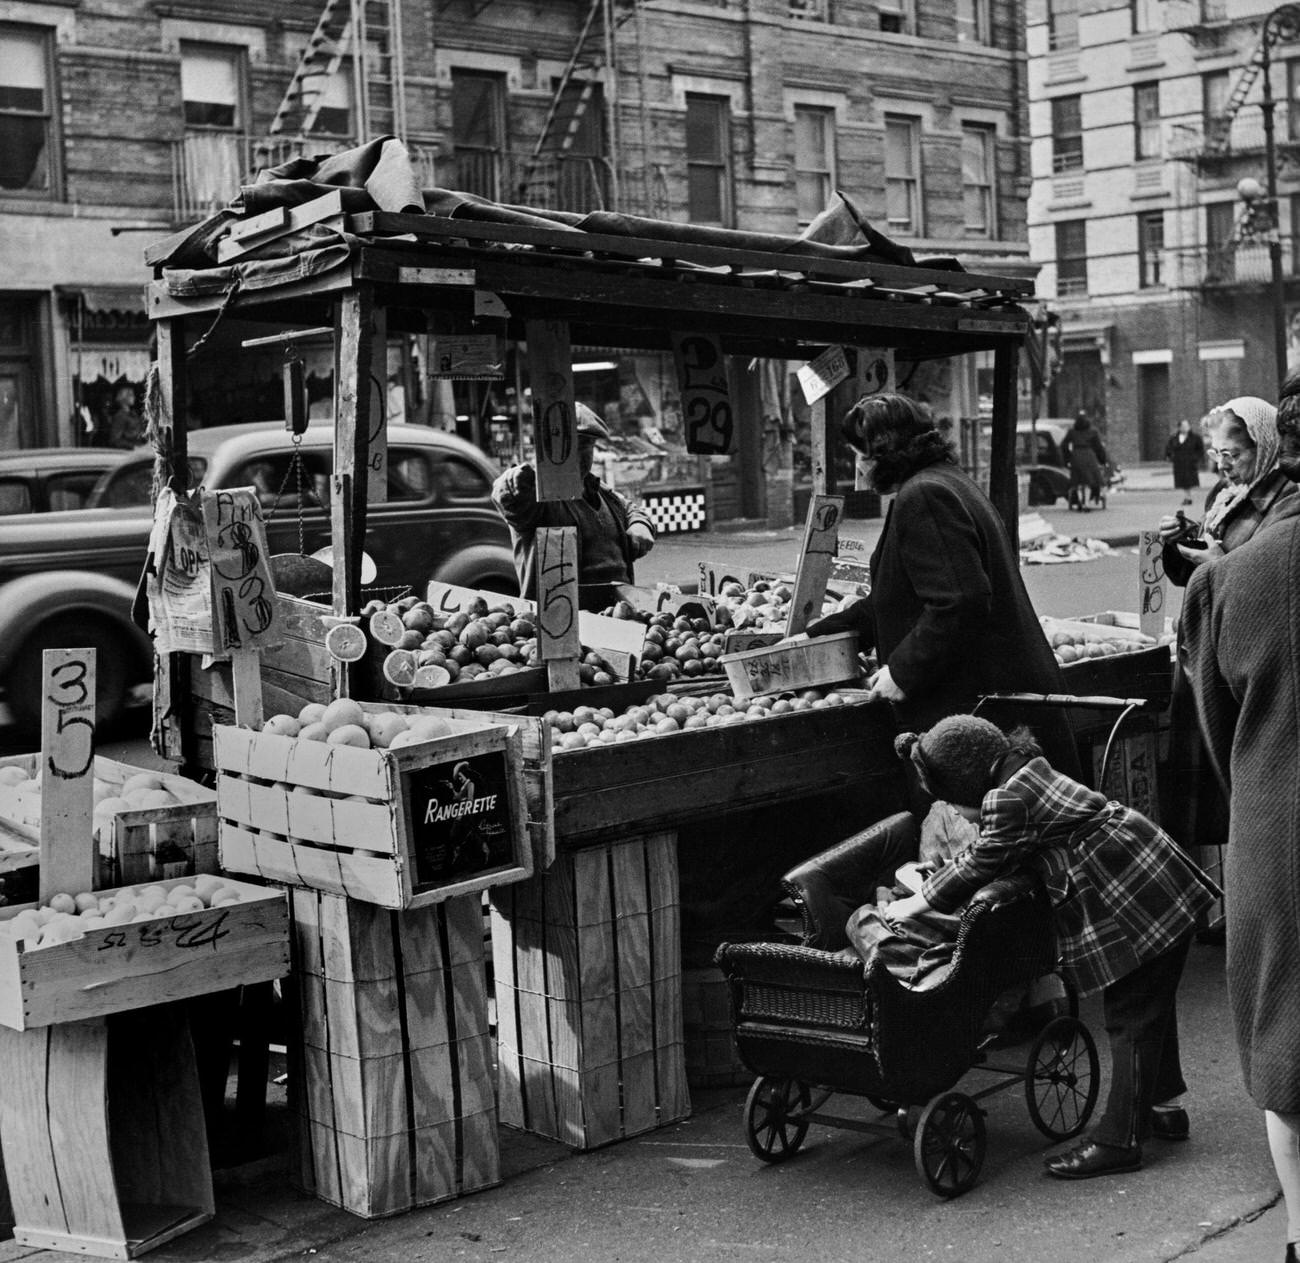 Shoppers At Brownsville Greengrocer'S Stall, Brooklyn, 1945.